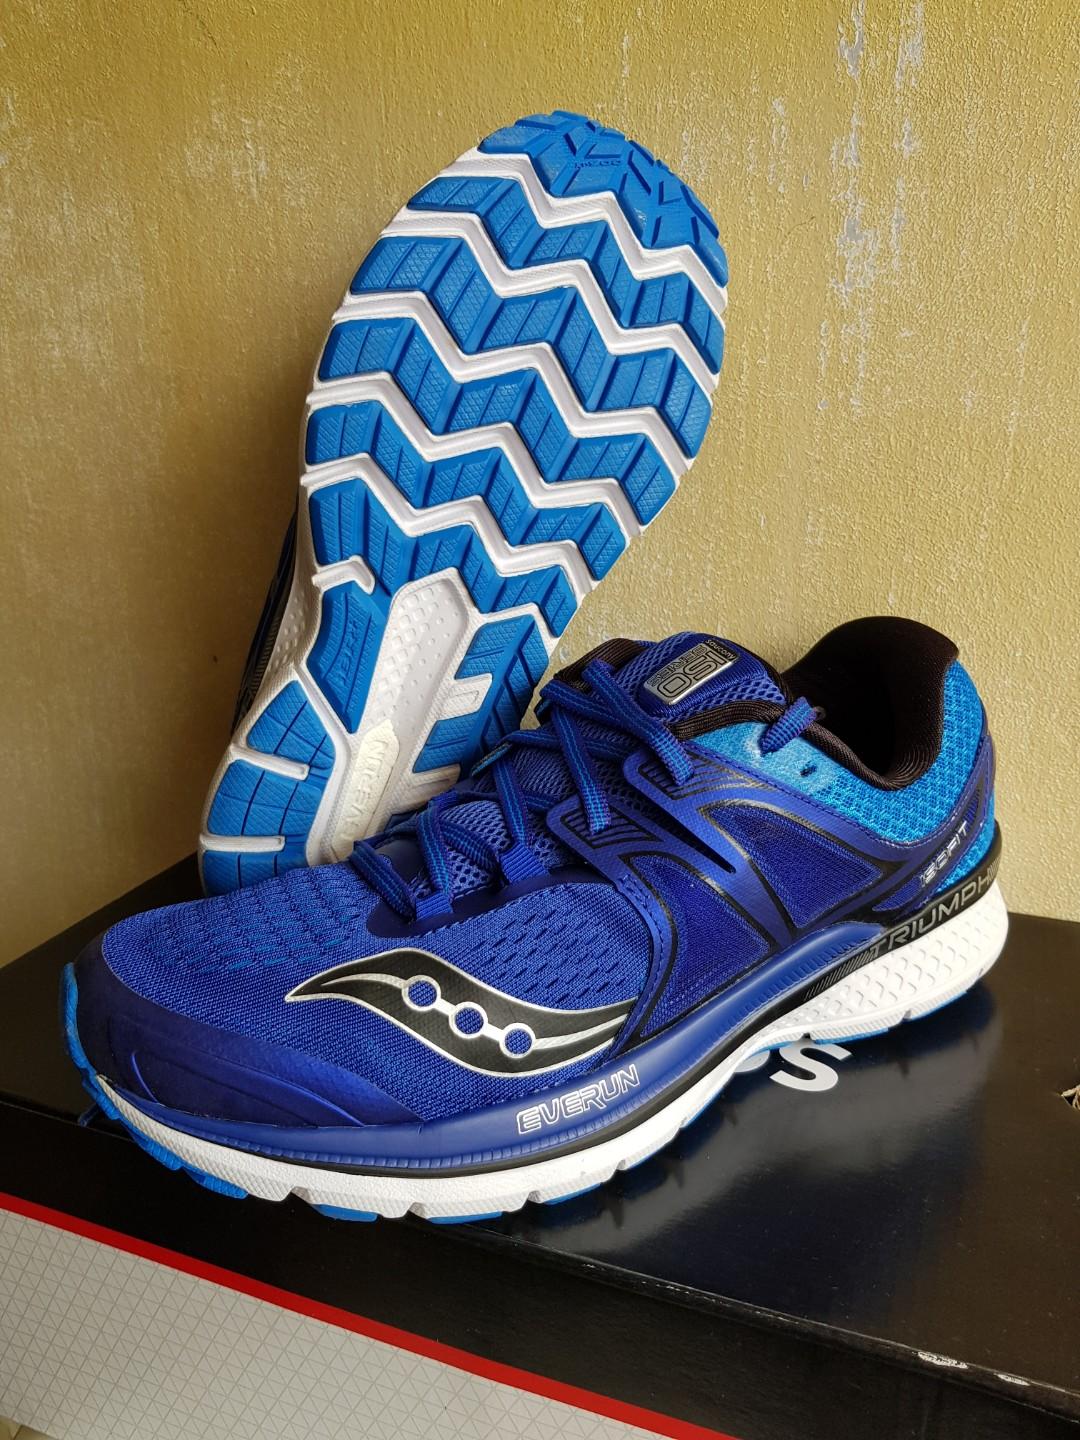 saucony triumph iso 3 men's running shoes